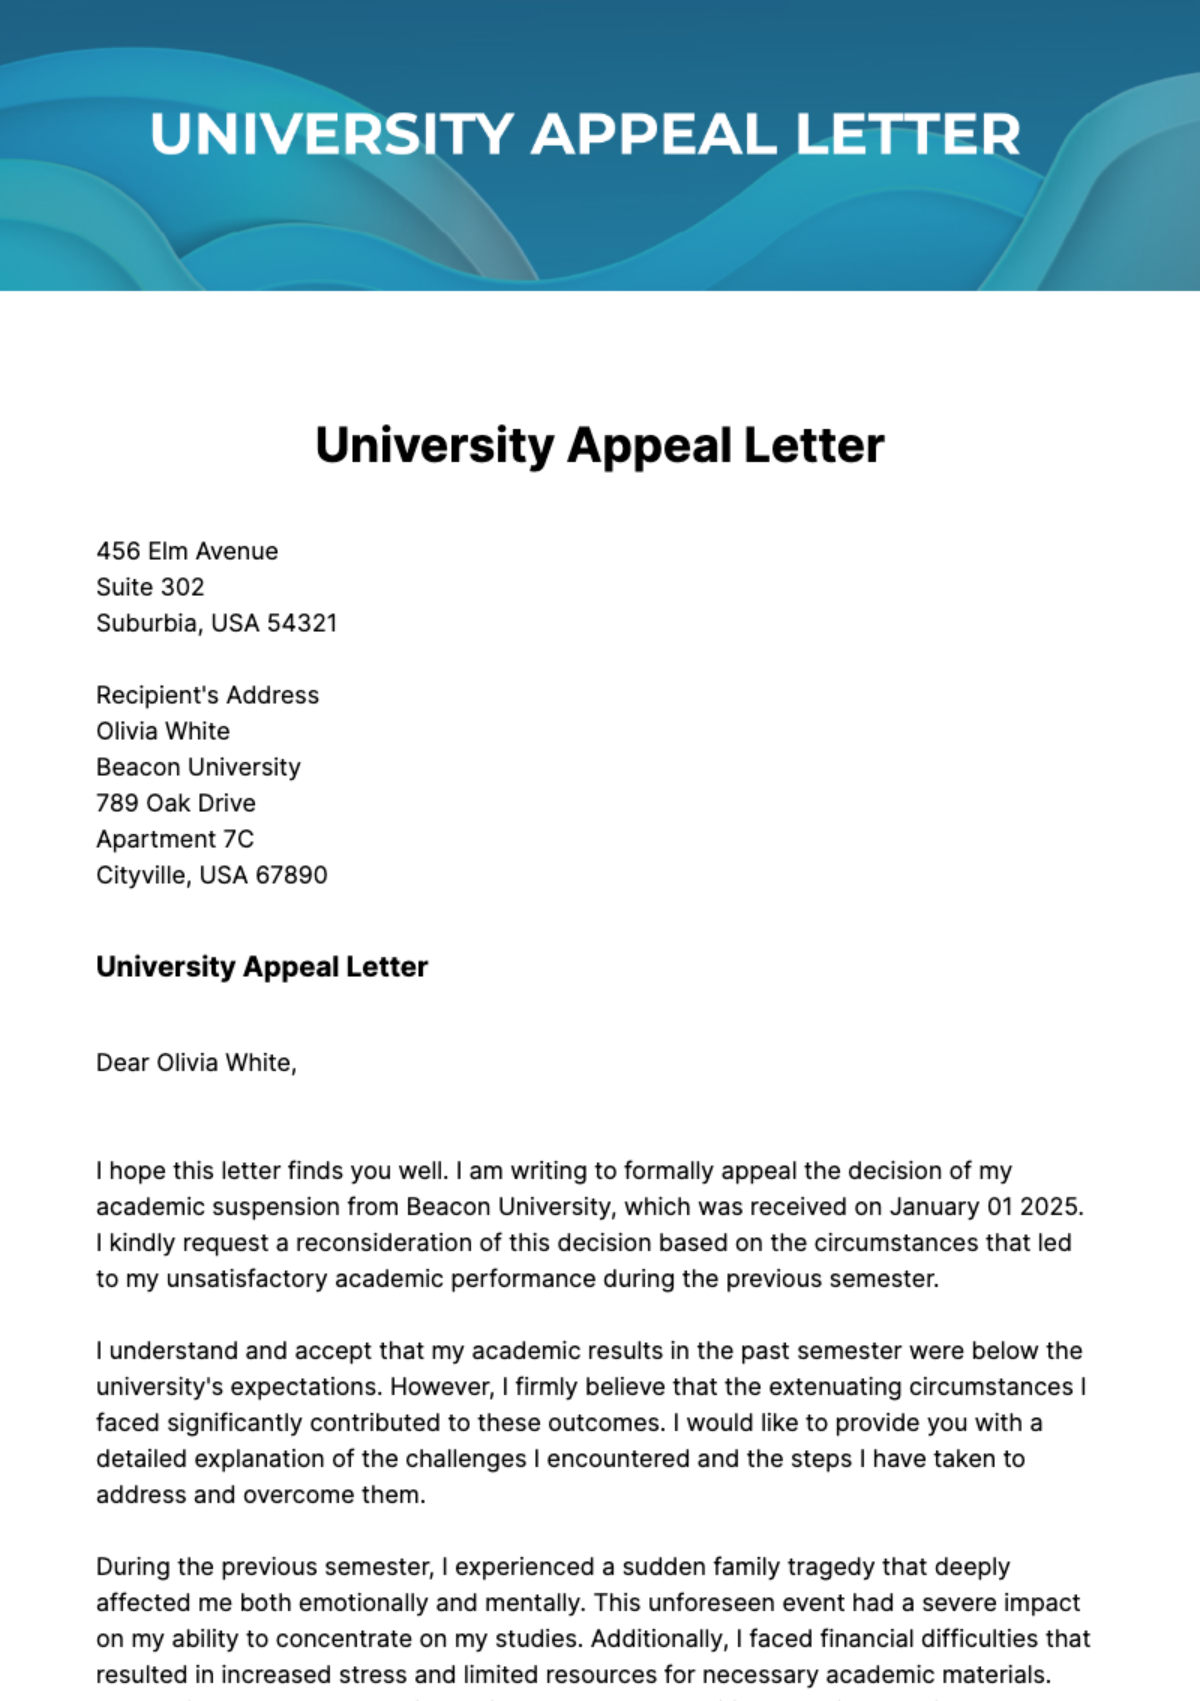 Free University Appeal Letter Template